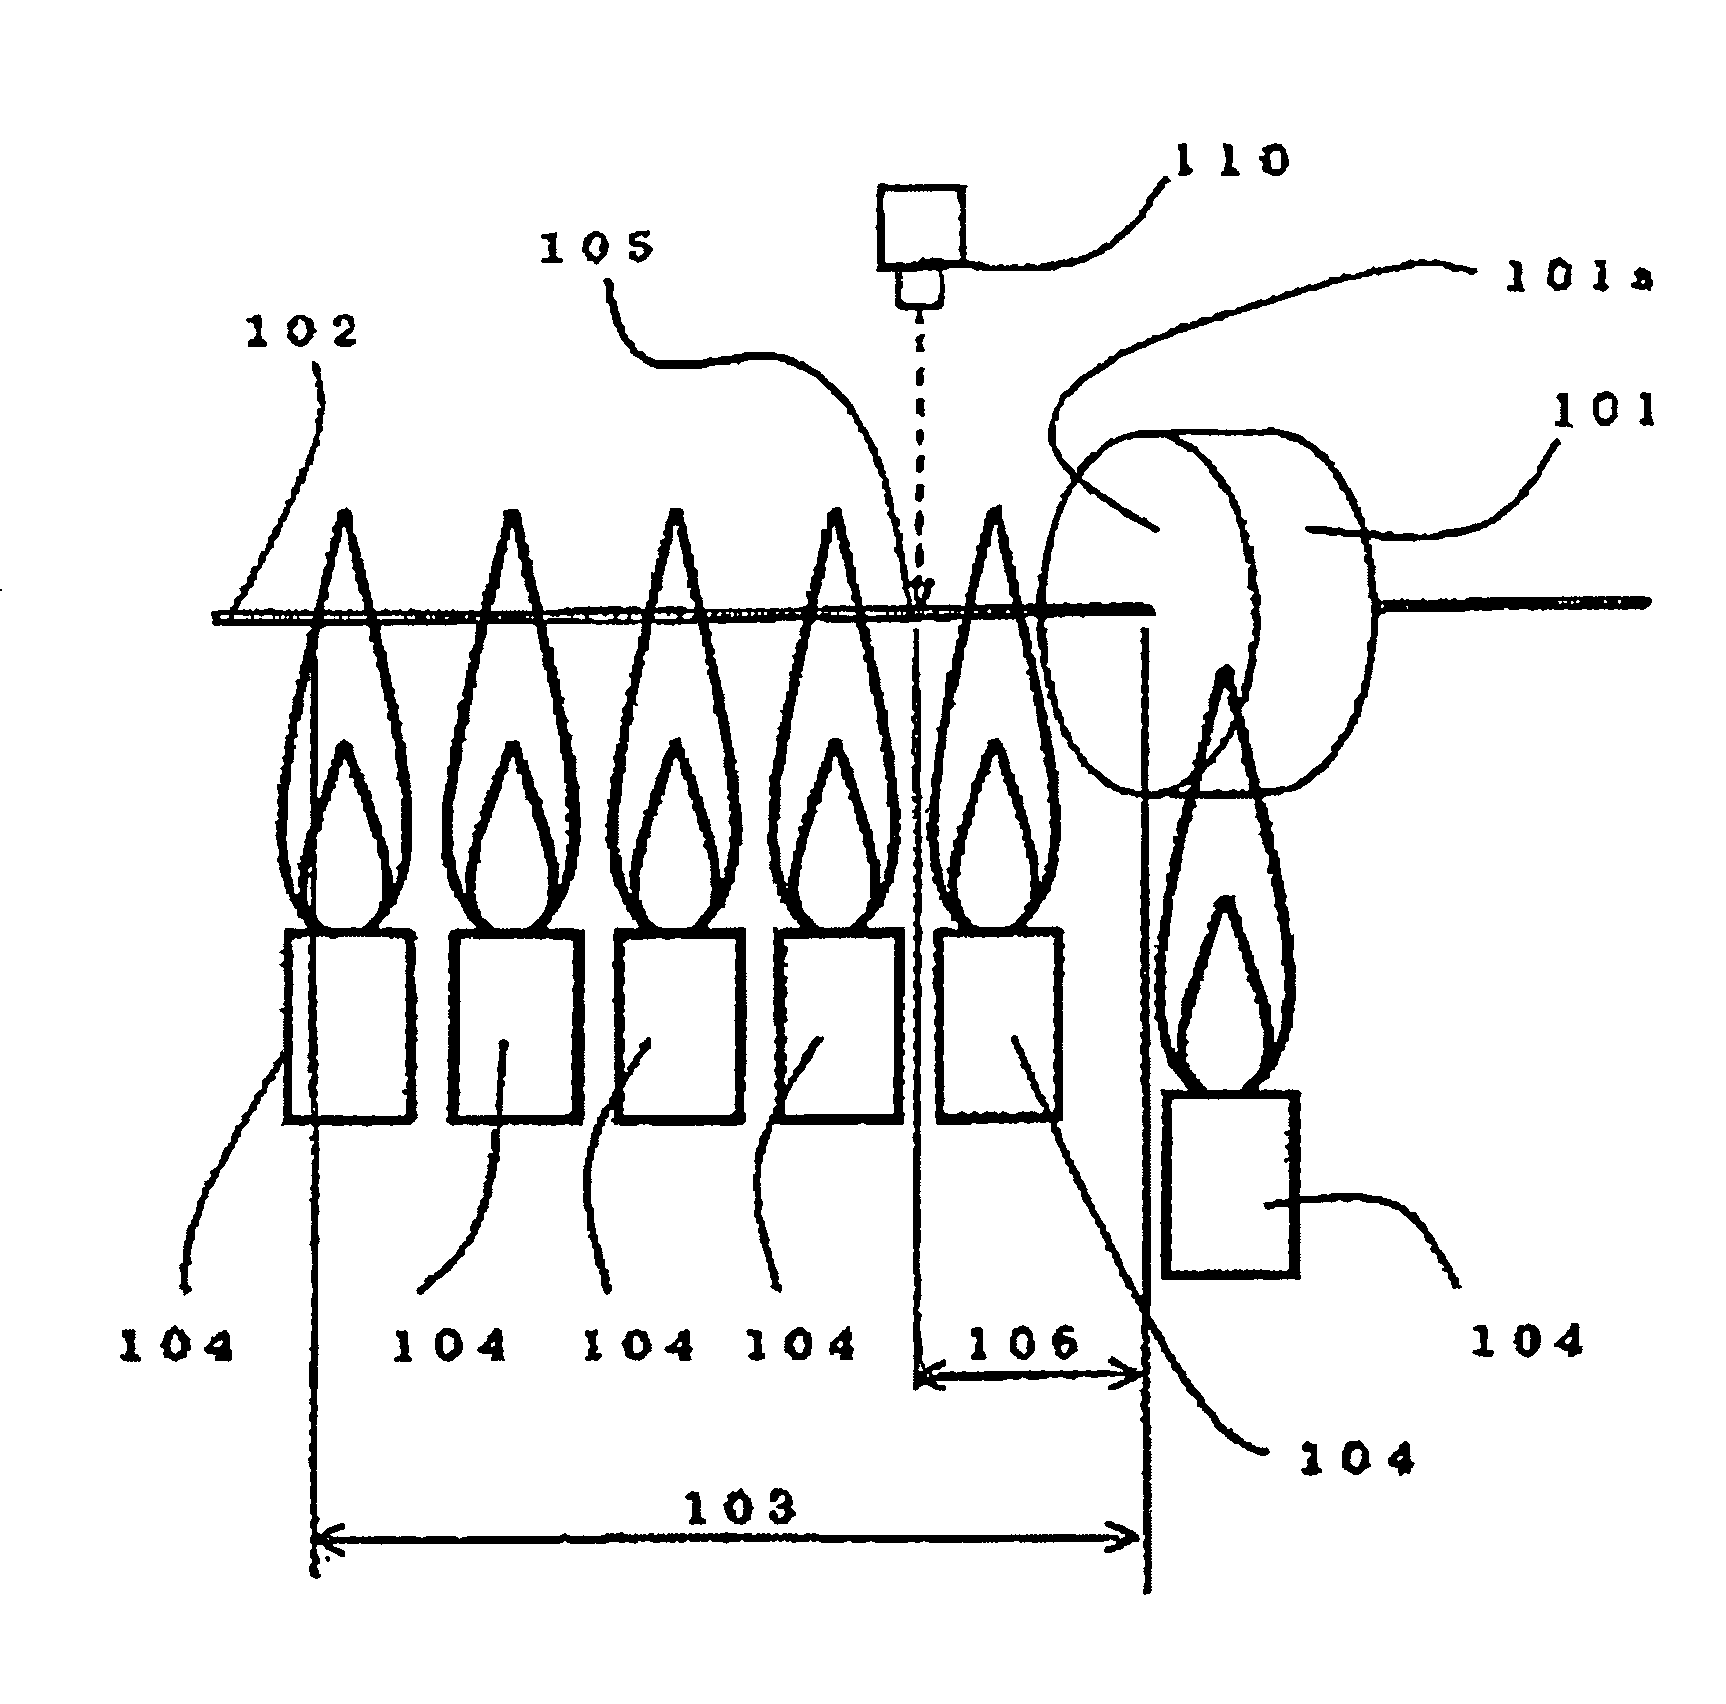 Method for manufacturing noble metal electric discharge chips for spark plugs